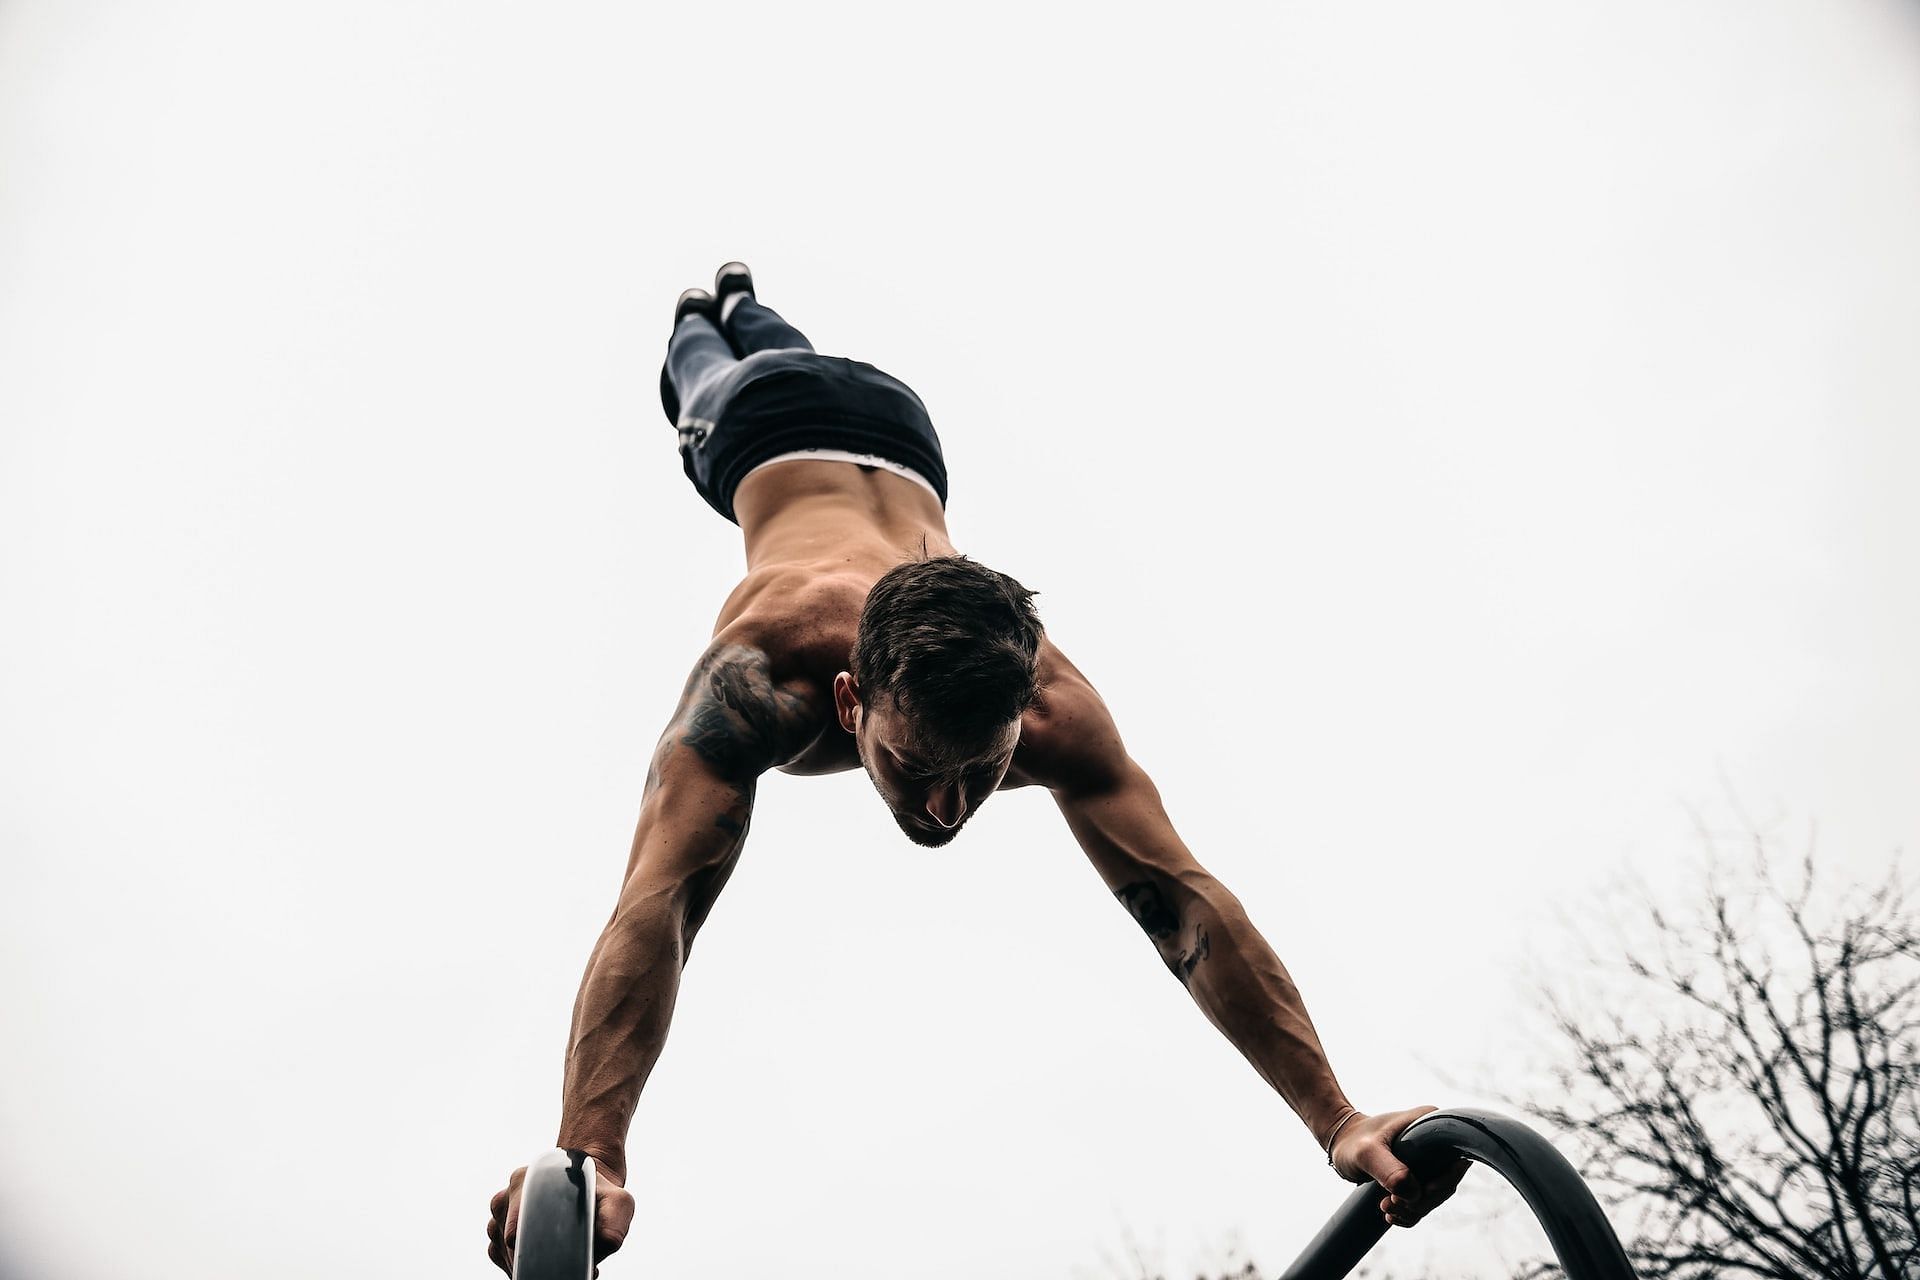 How to do a handstand? (Photo by Bogdan Pasca on Unsplash)